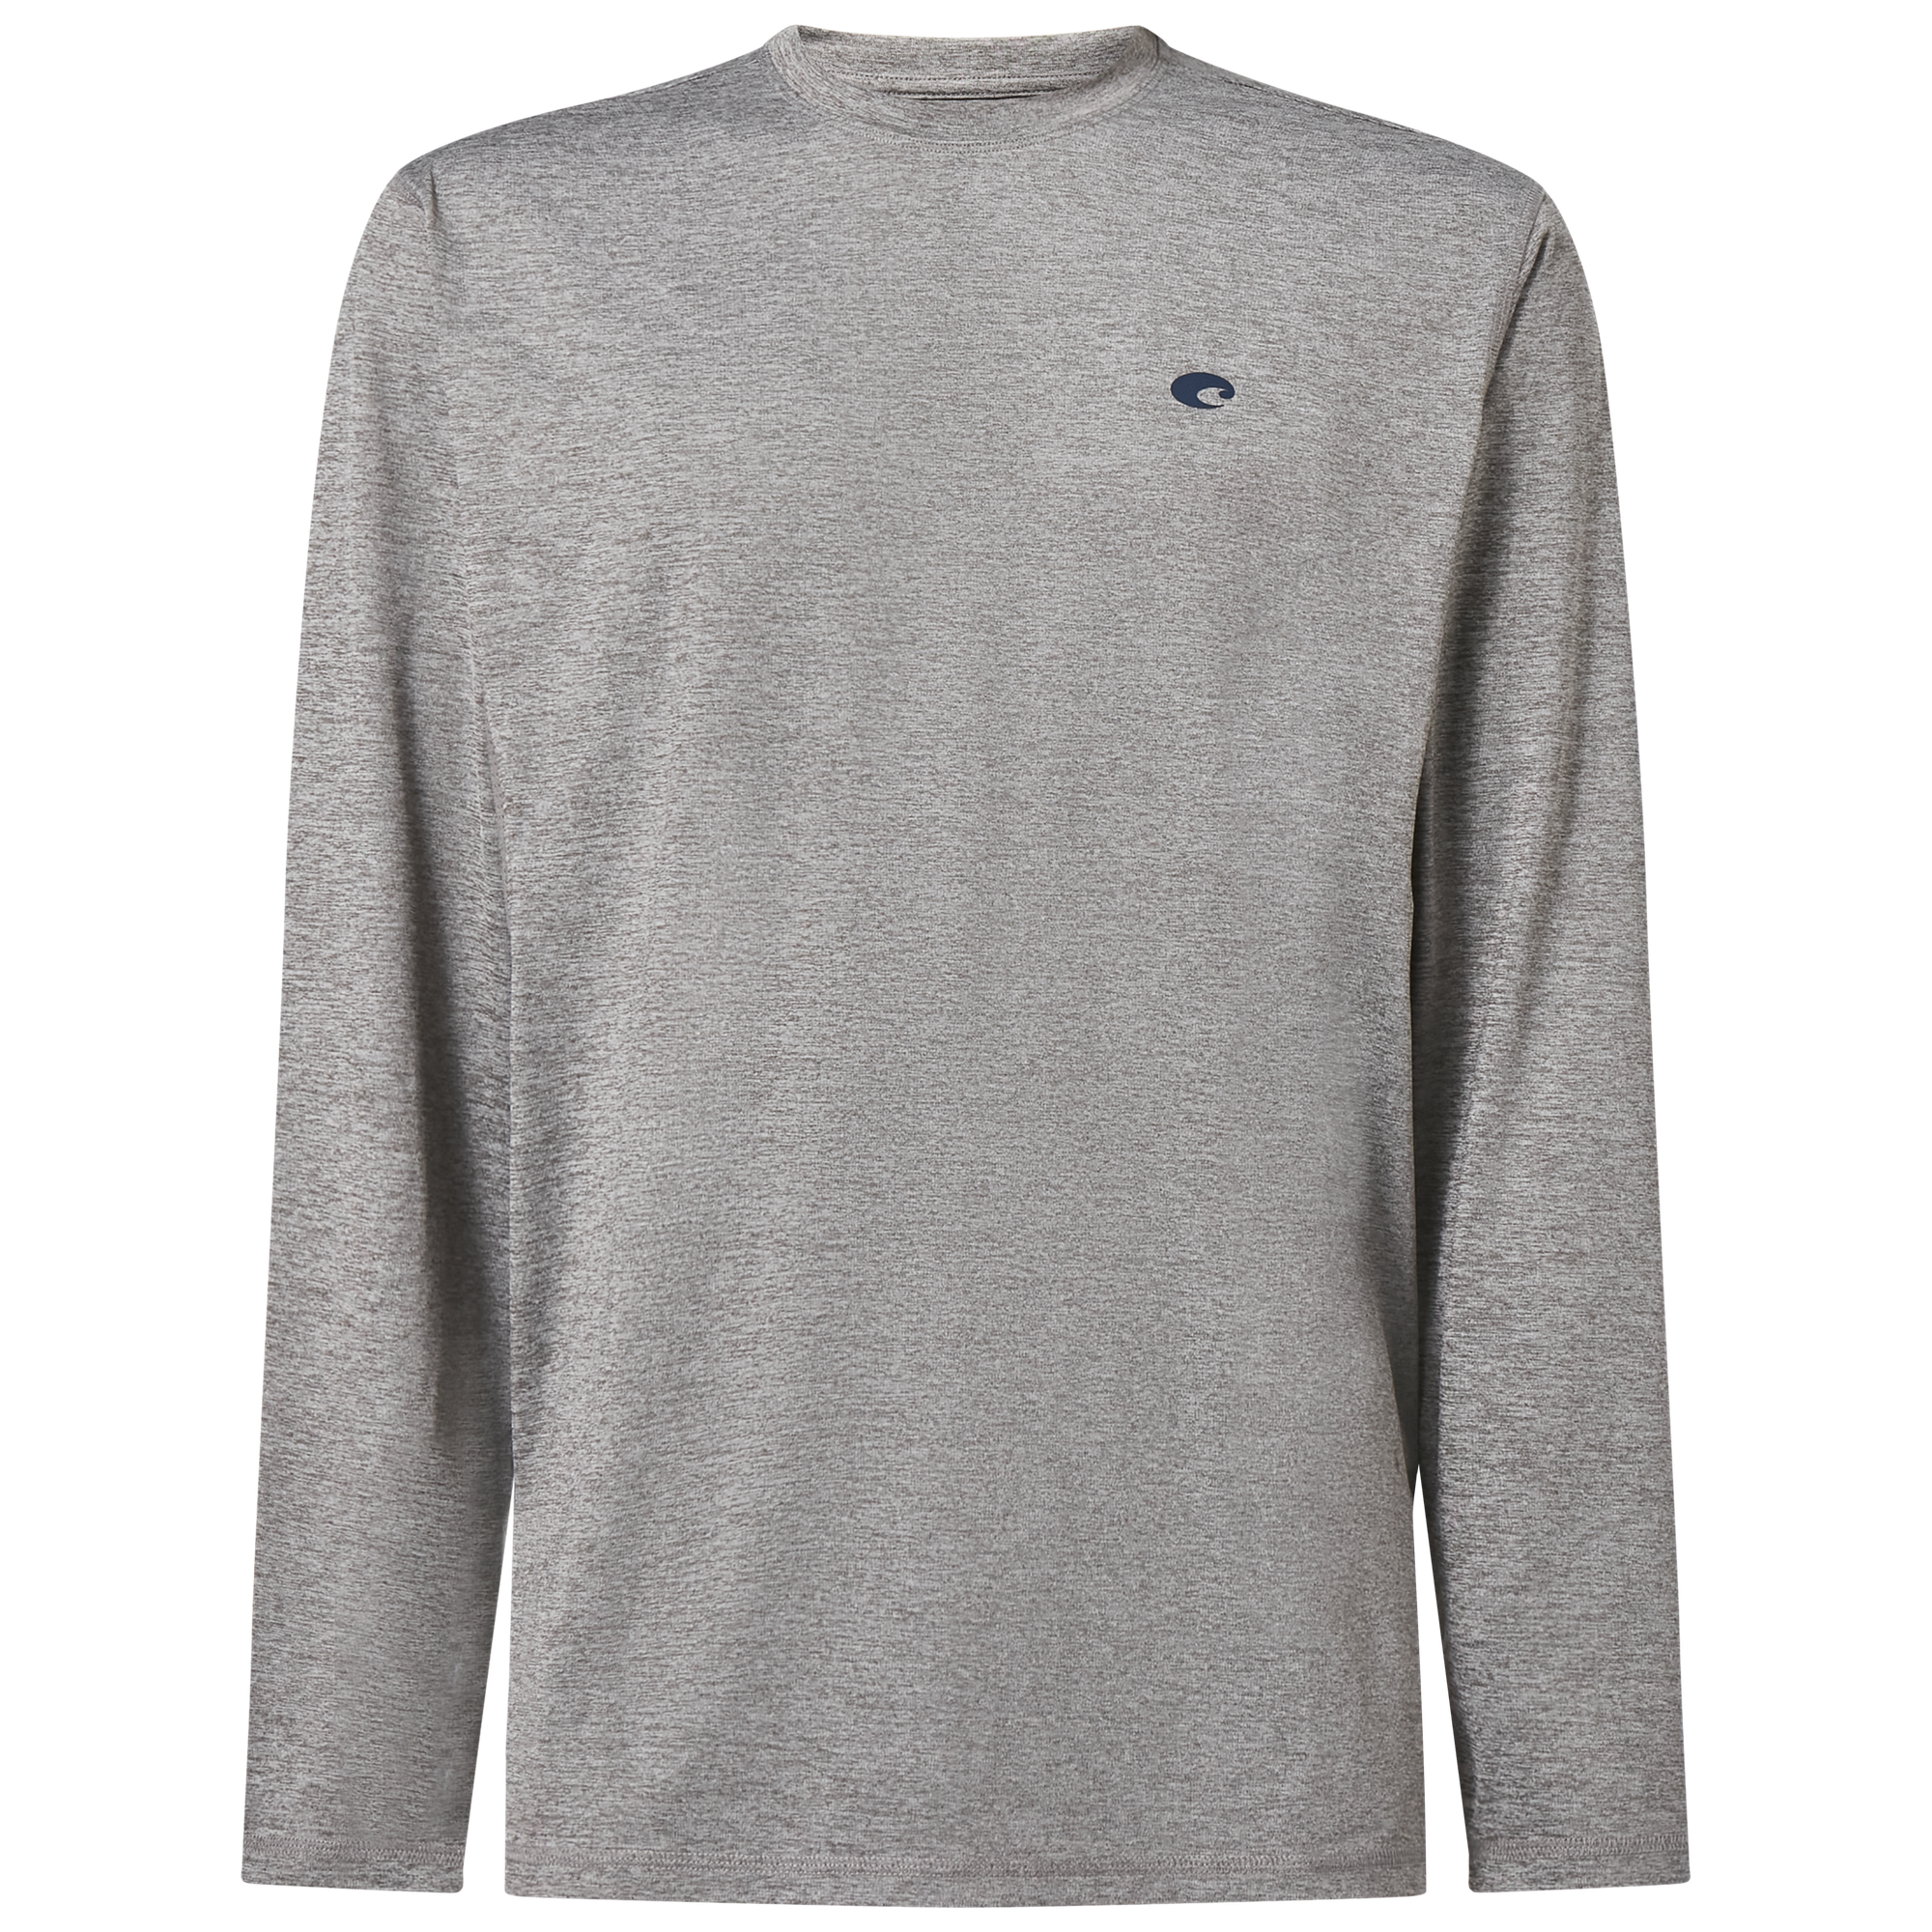 Bimini Bay Outfitters Men's Hook'M Performance Graphic Long Sleeve